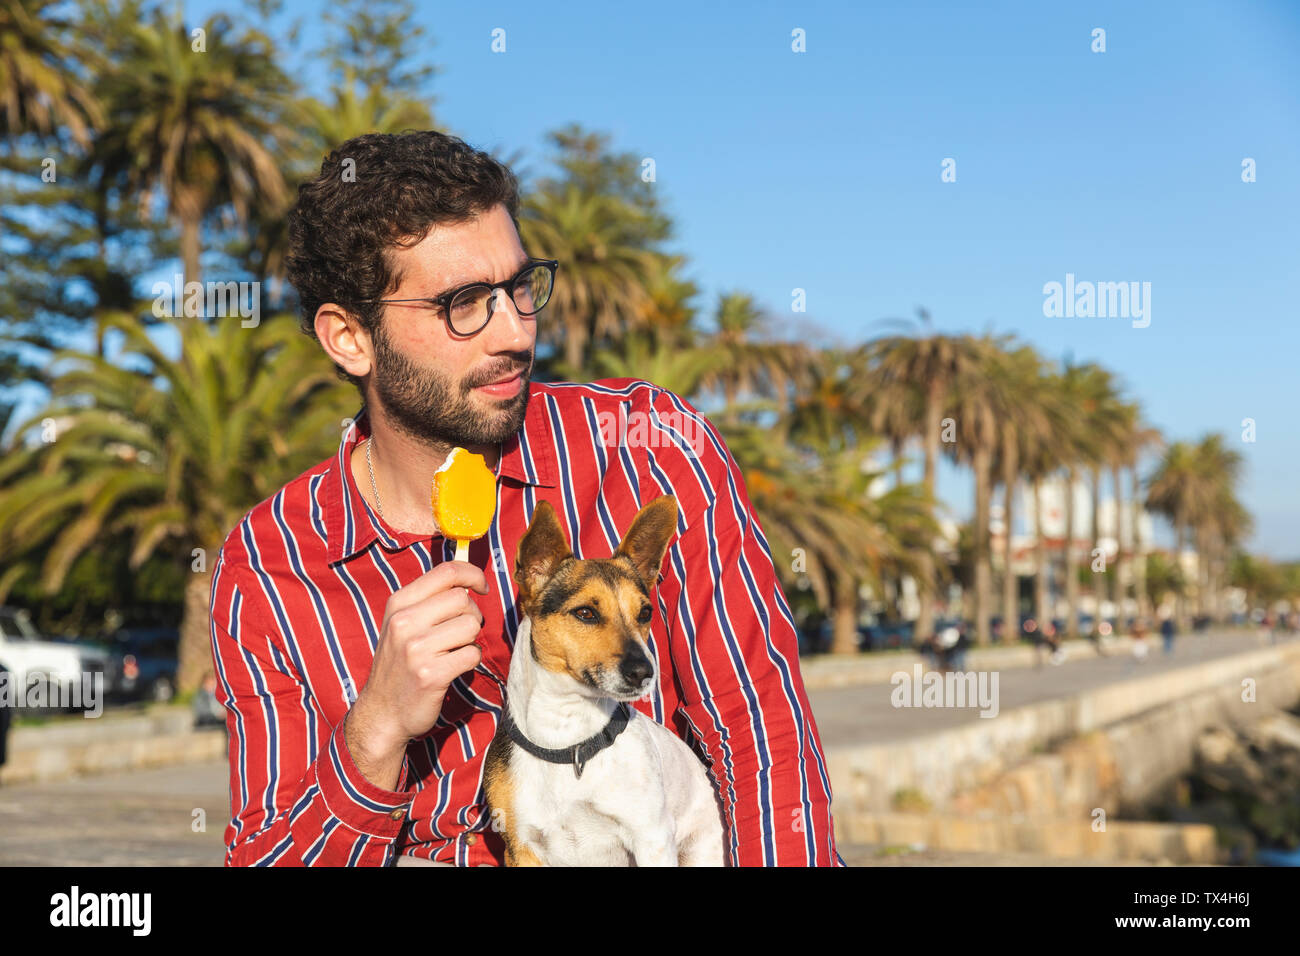 Young man with dog eating ice lolly Banque D'Images